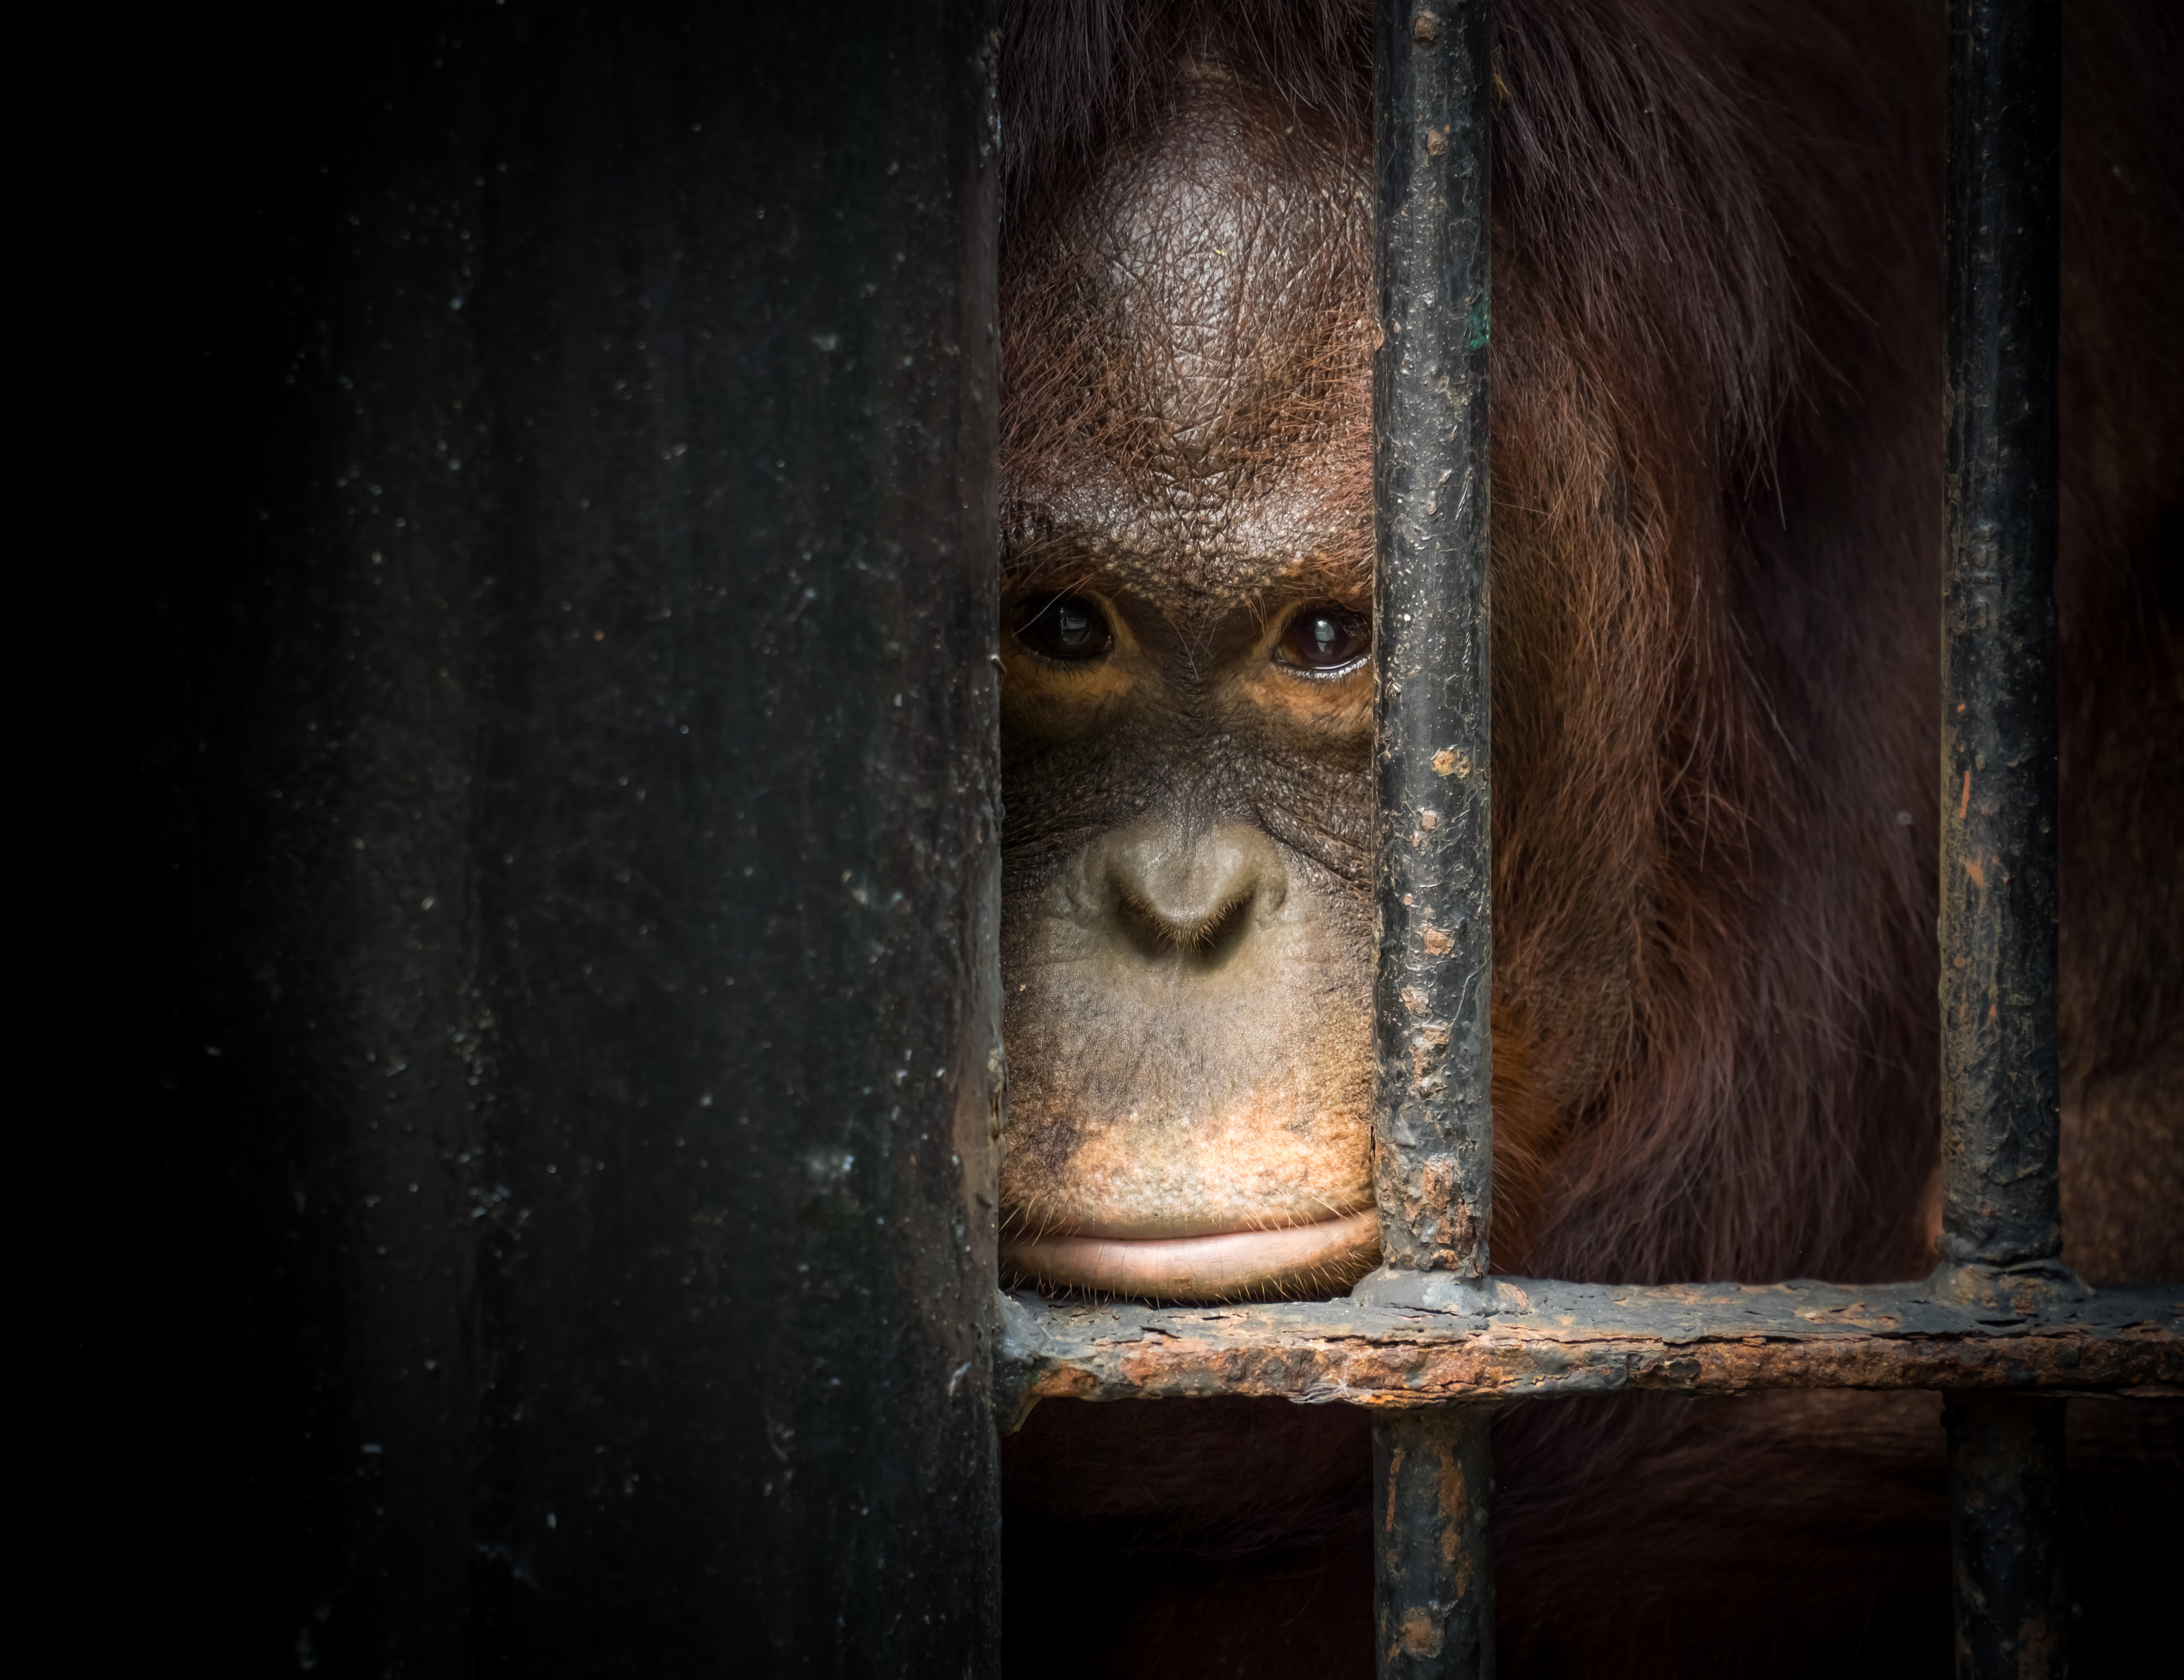 Orangutan staying in the cage